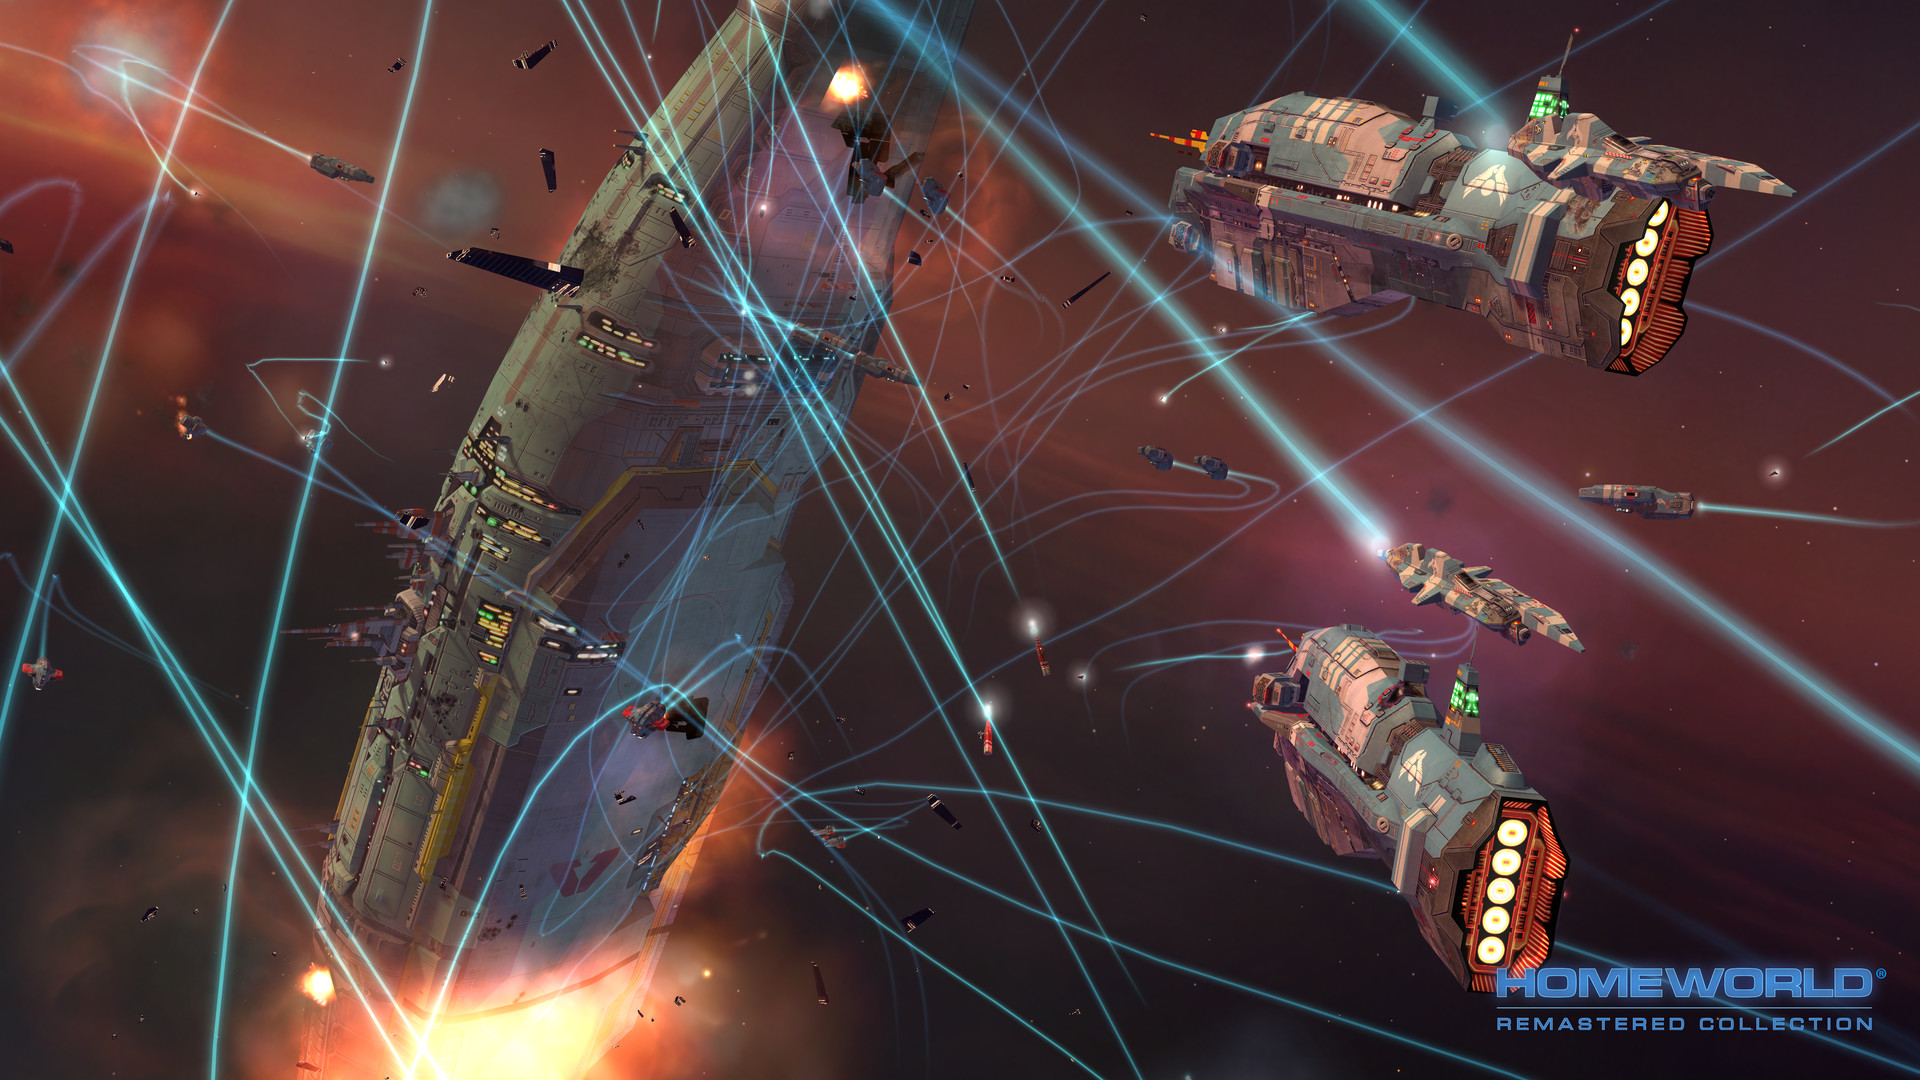 homeworld remastered collection controls